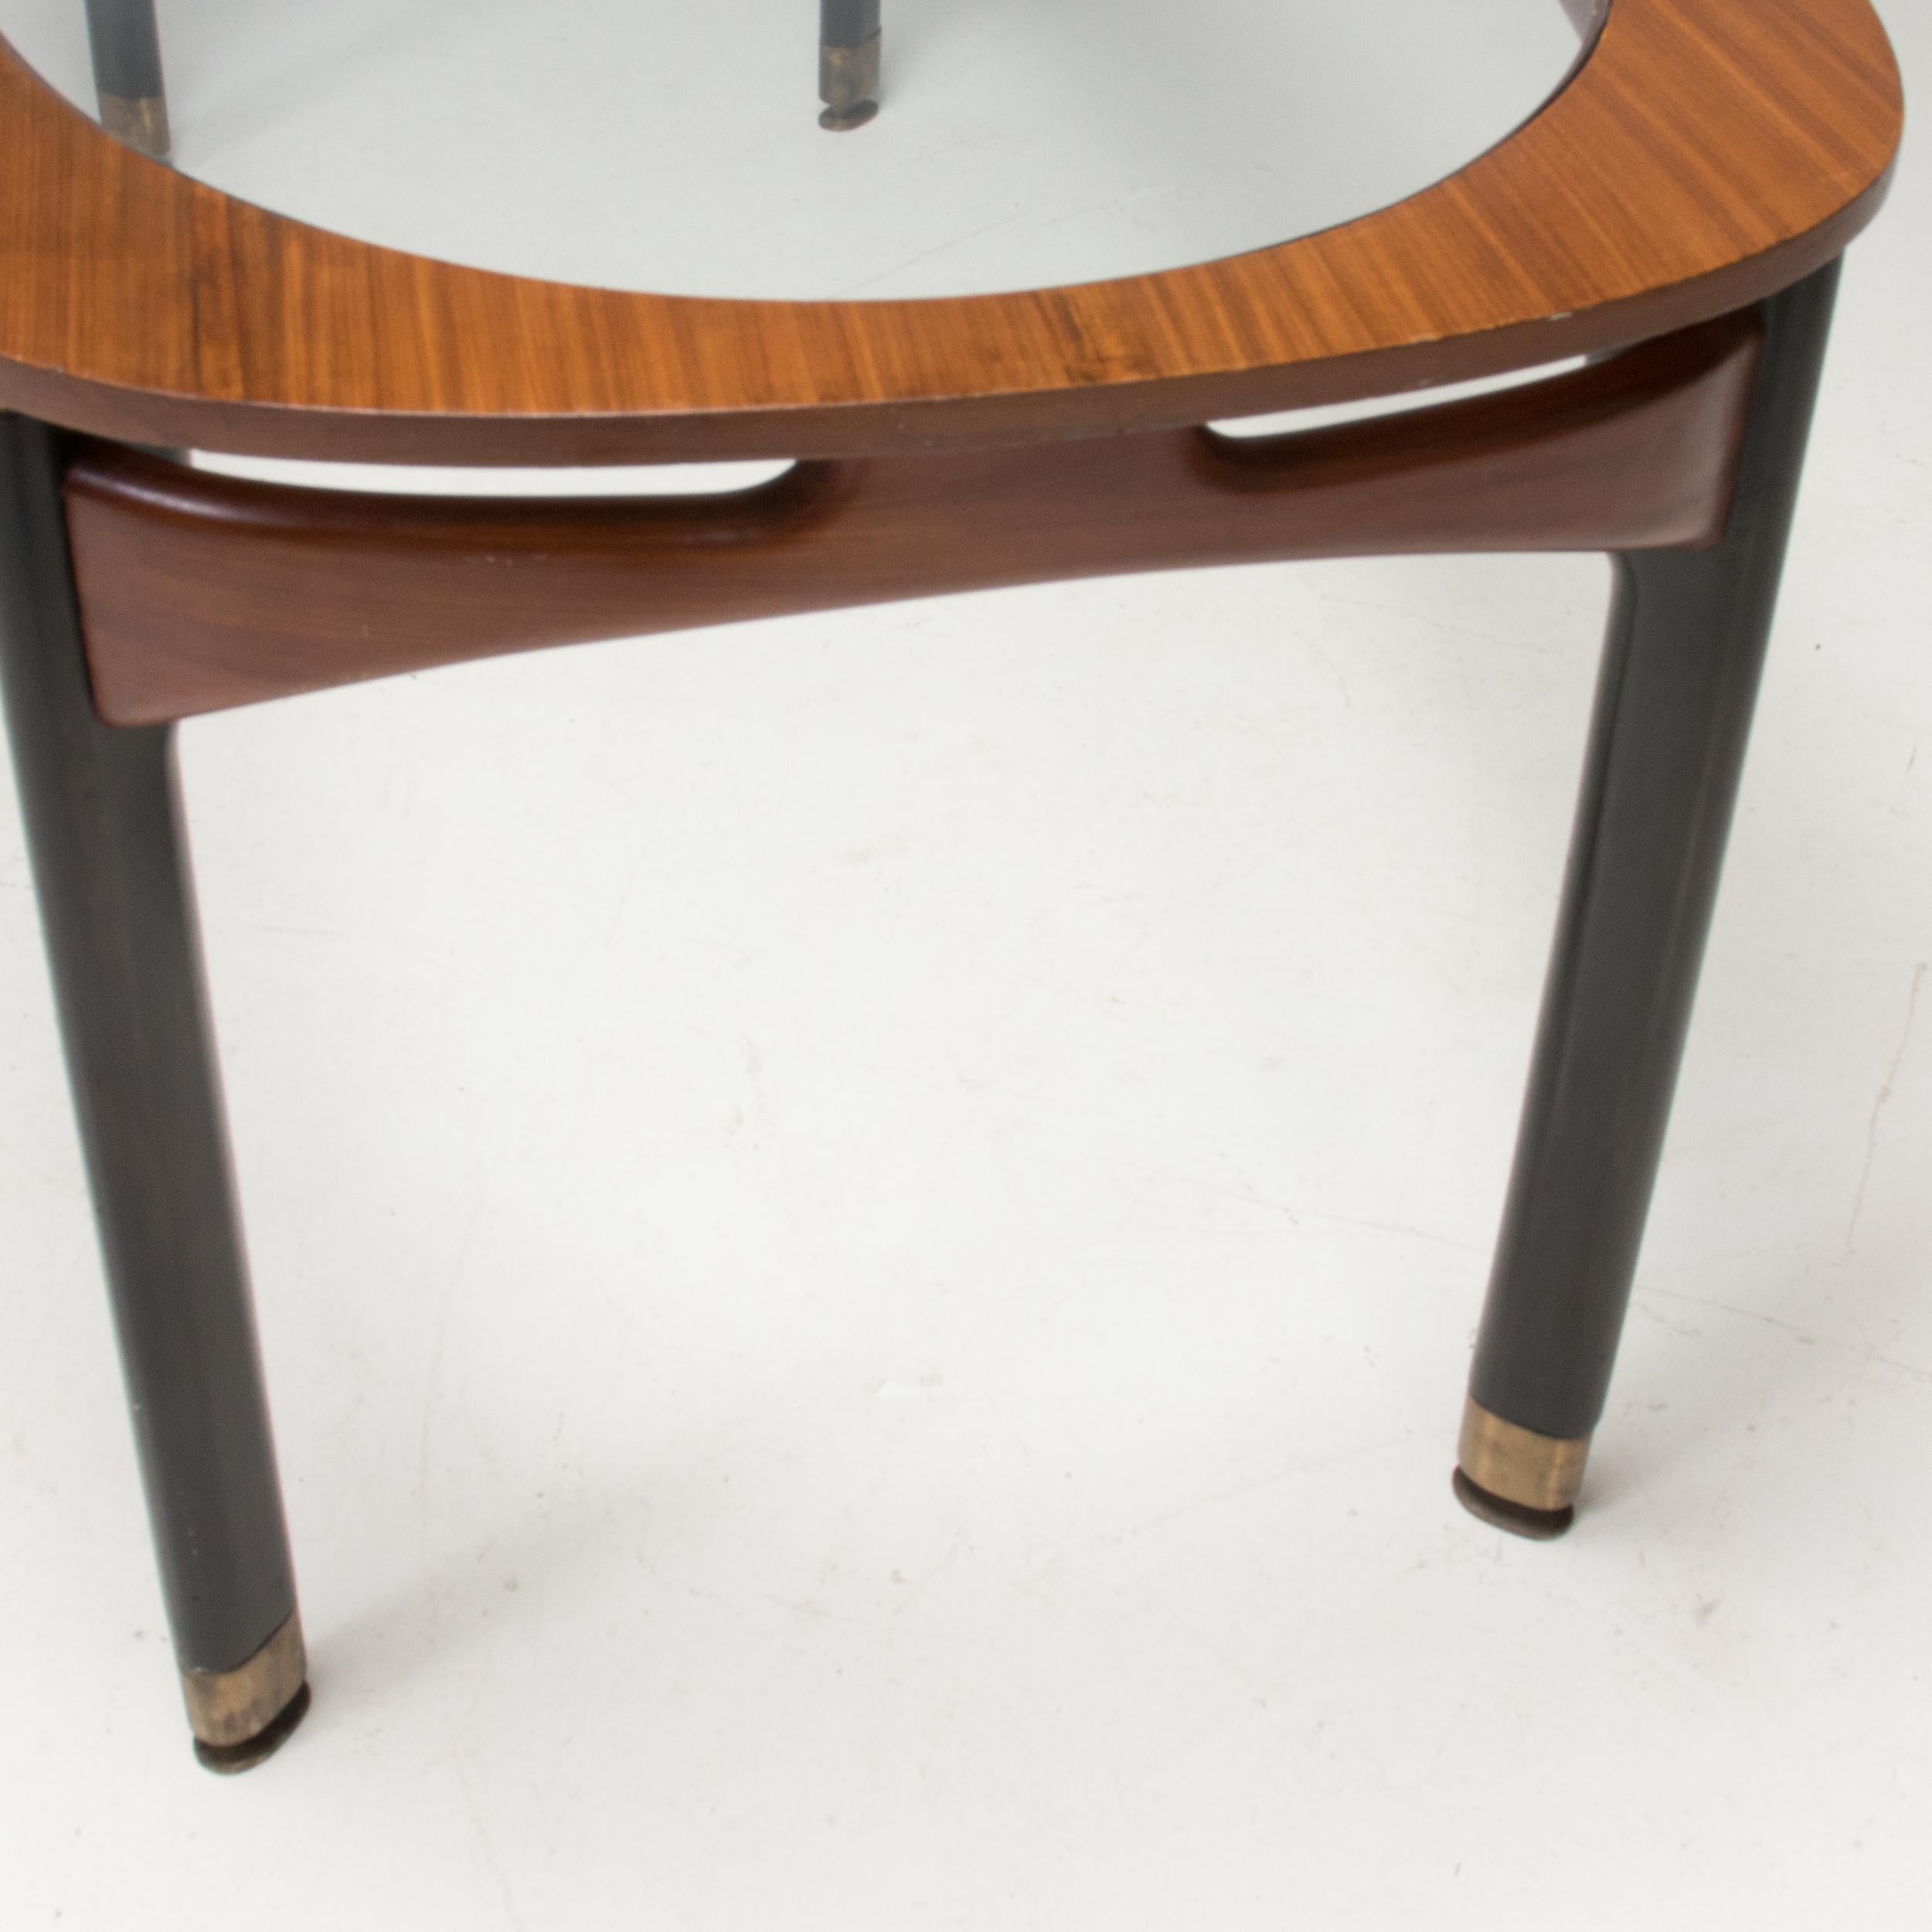 Mid Century Italian Rosewood & Glass Rectangular Dining Table, 1950s For Sale 4